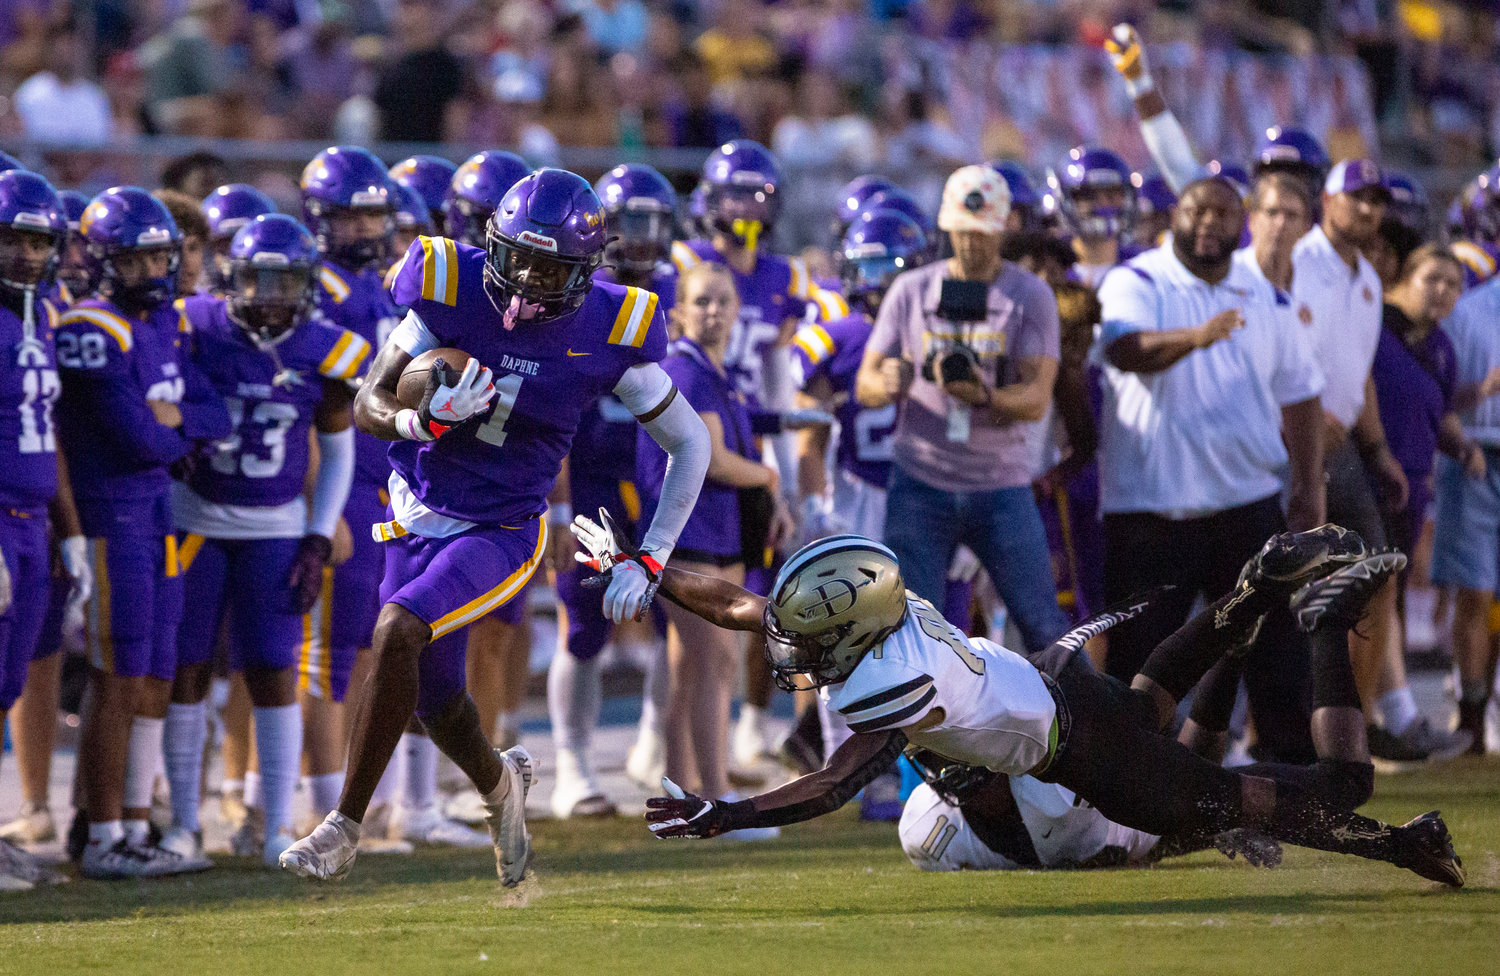 Daphne senior receiver Stacey Boykins outruns Davidson defenders on his 44-yard touchdown in the first half of the Trojans’ region game against the Warriors Friday night at Jubilee Stadium. Daphne won 40-21 to move to 2-0 in region play.